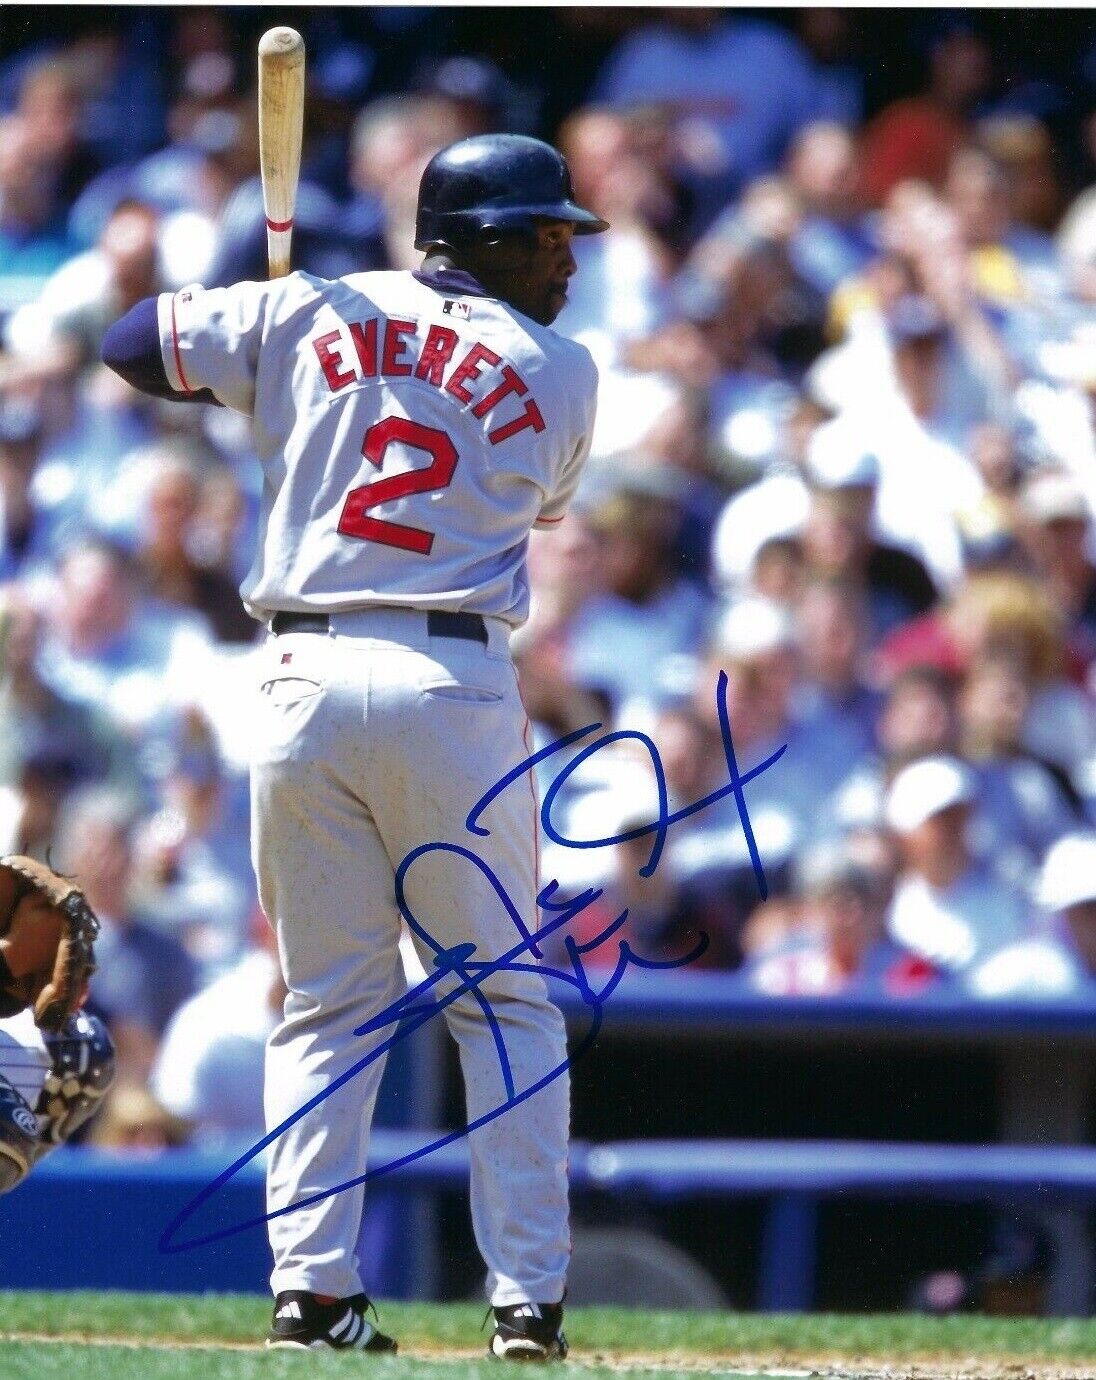 Carl Everett Autographed Signed 8x10 Photo Poster painting ( Red Sox ) REPRINT